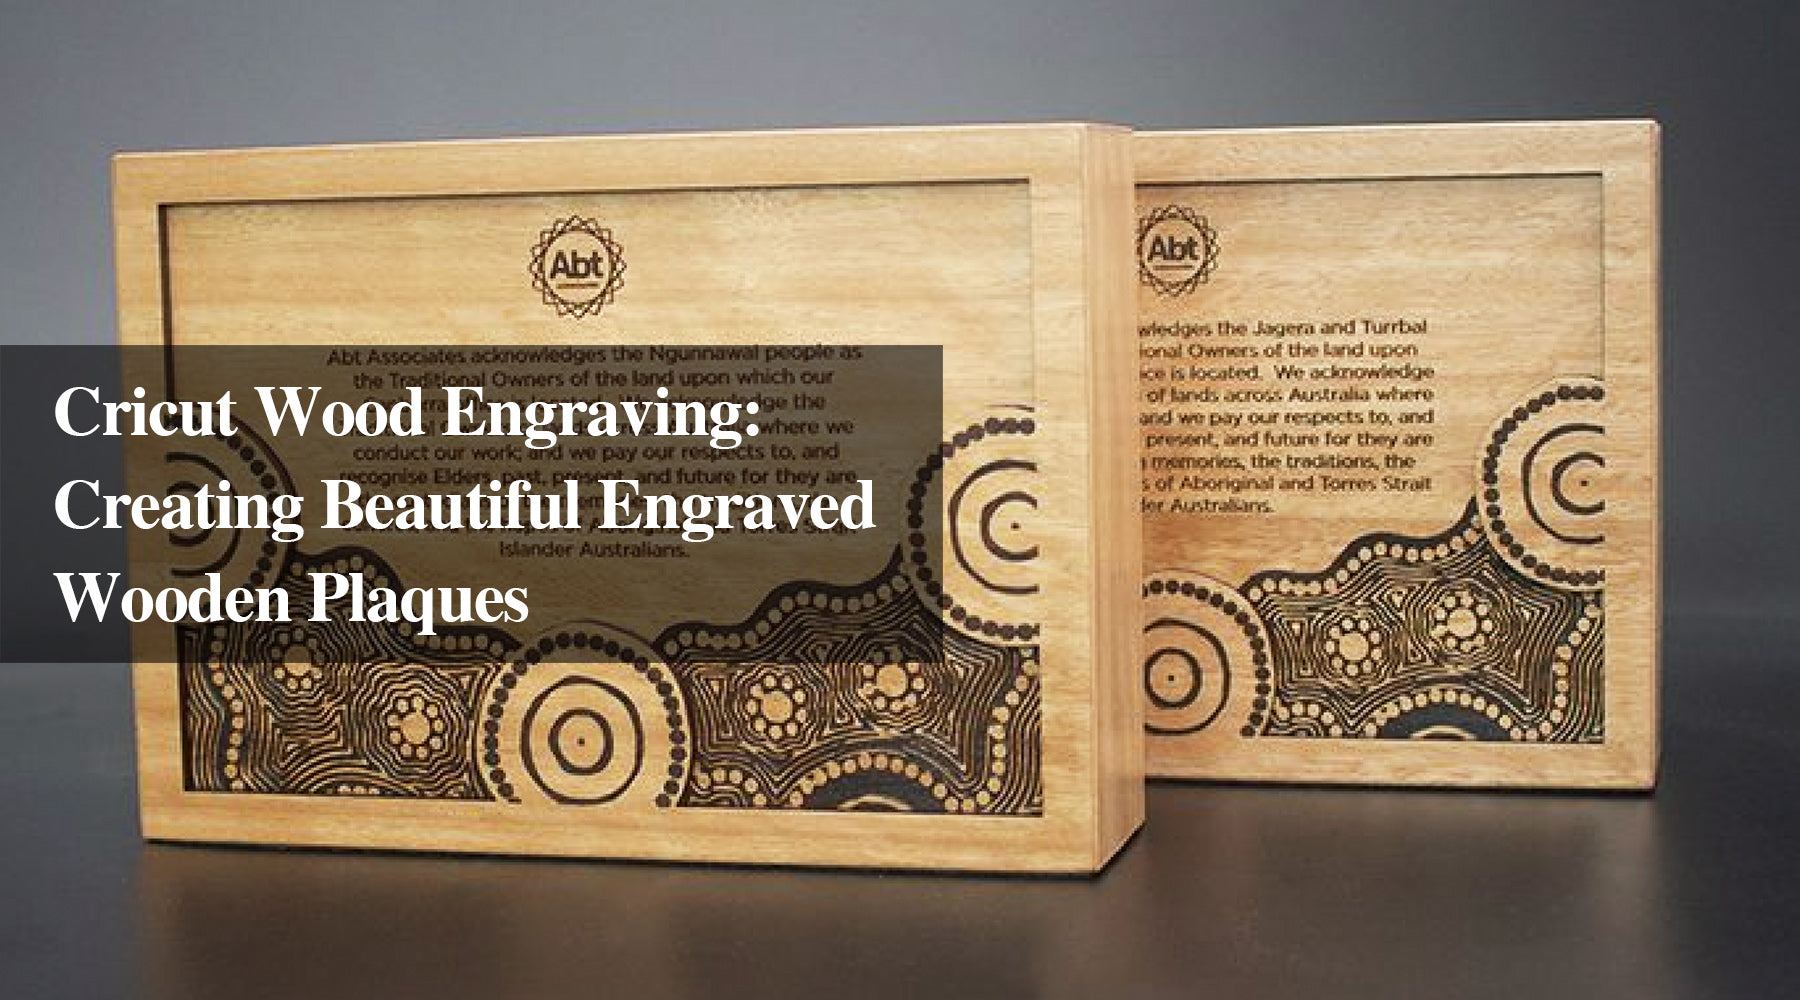 Cricut Wood Engraving: Creating Beautiful Engraved Wooden Plaques